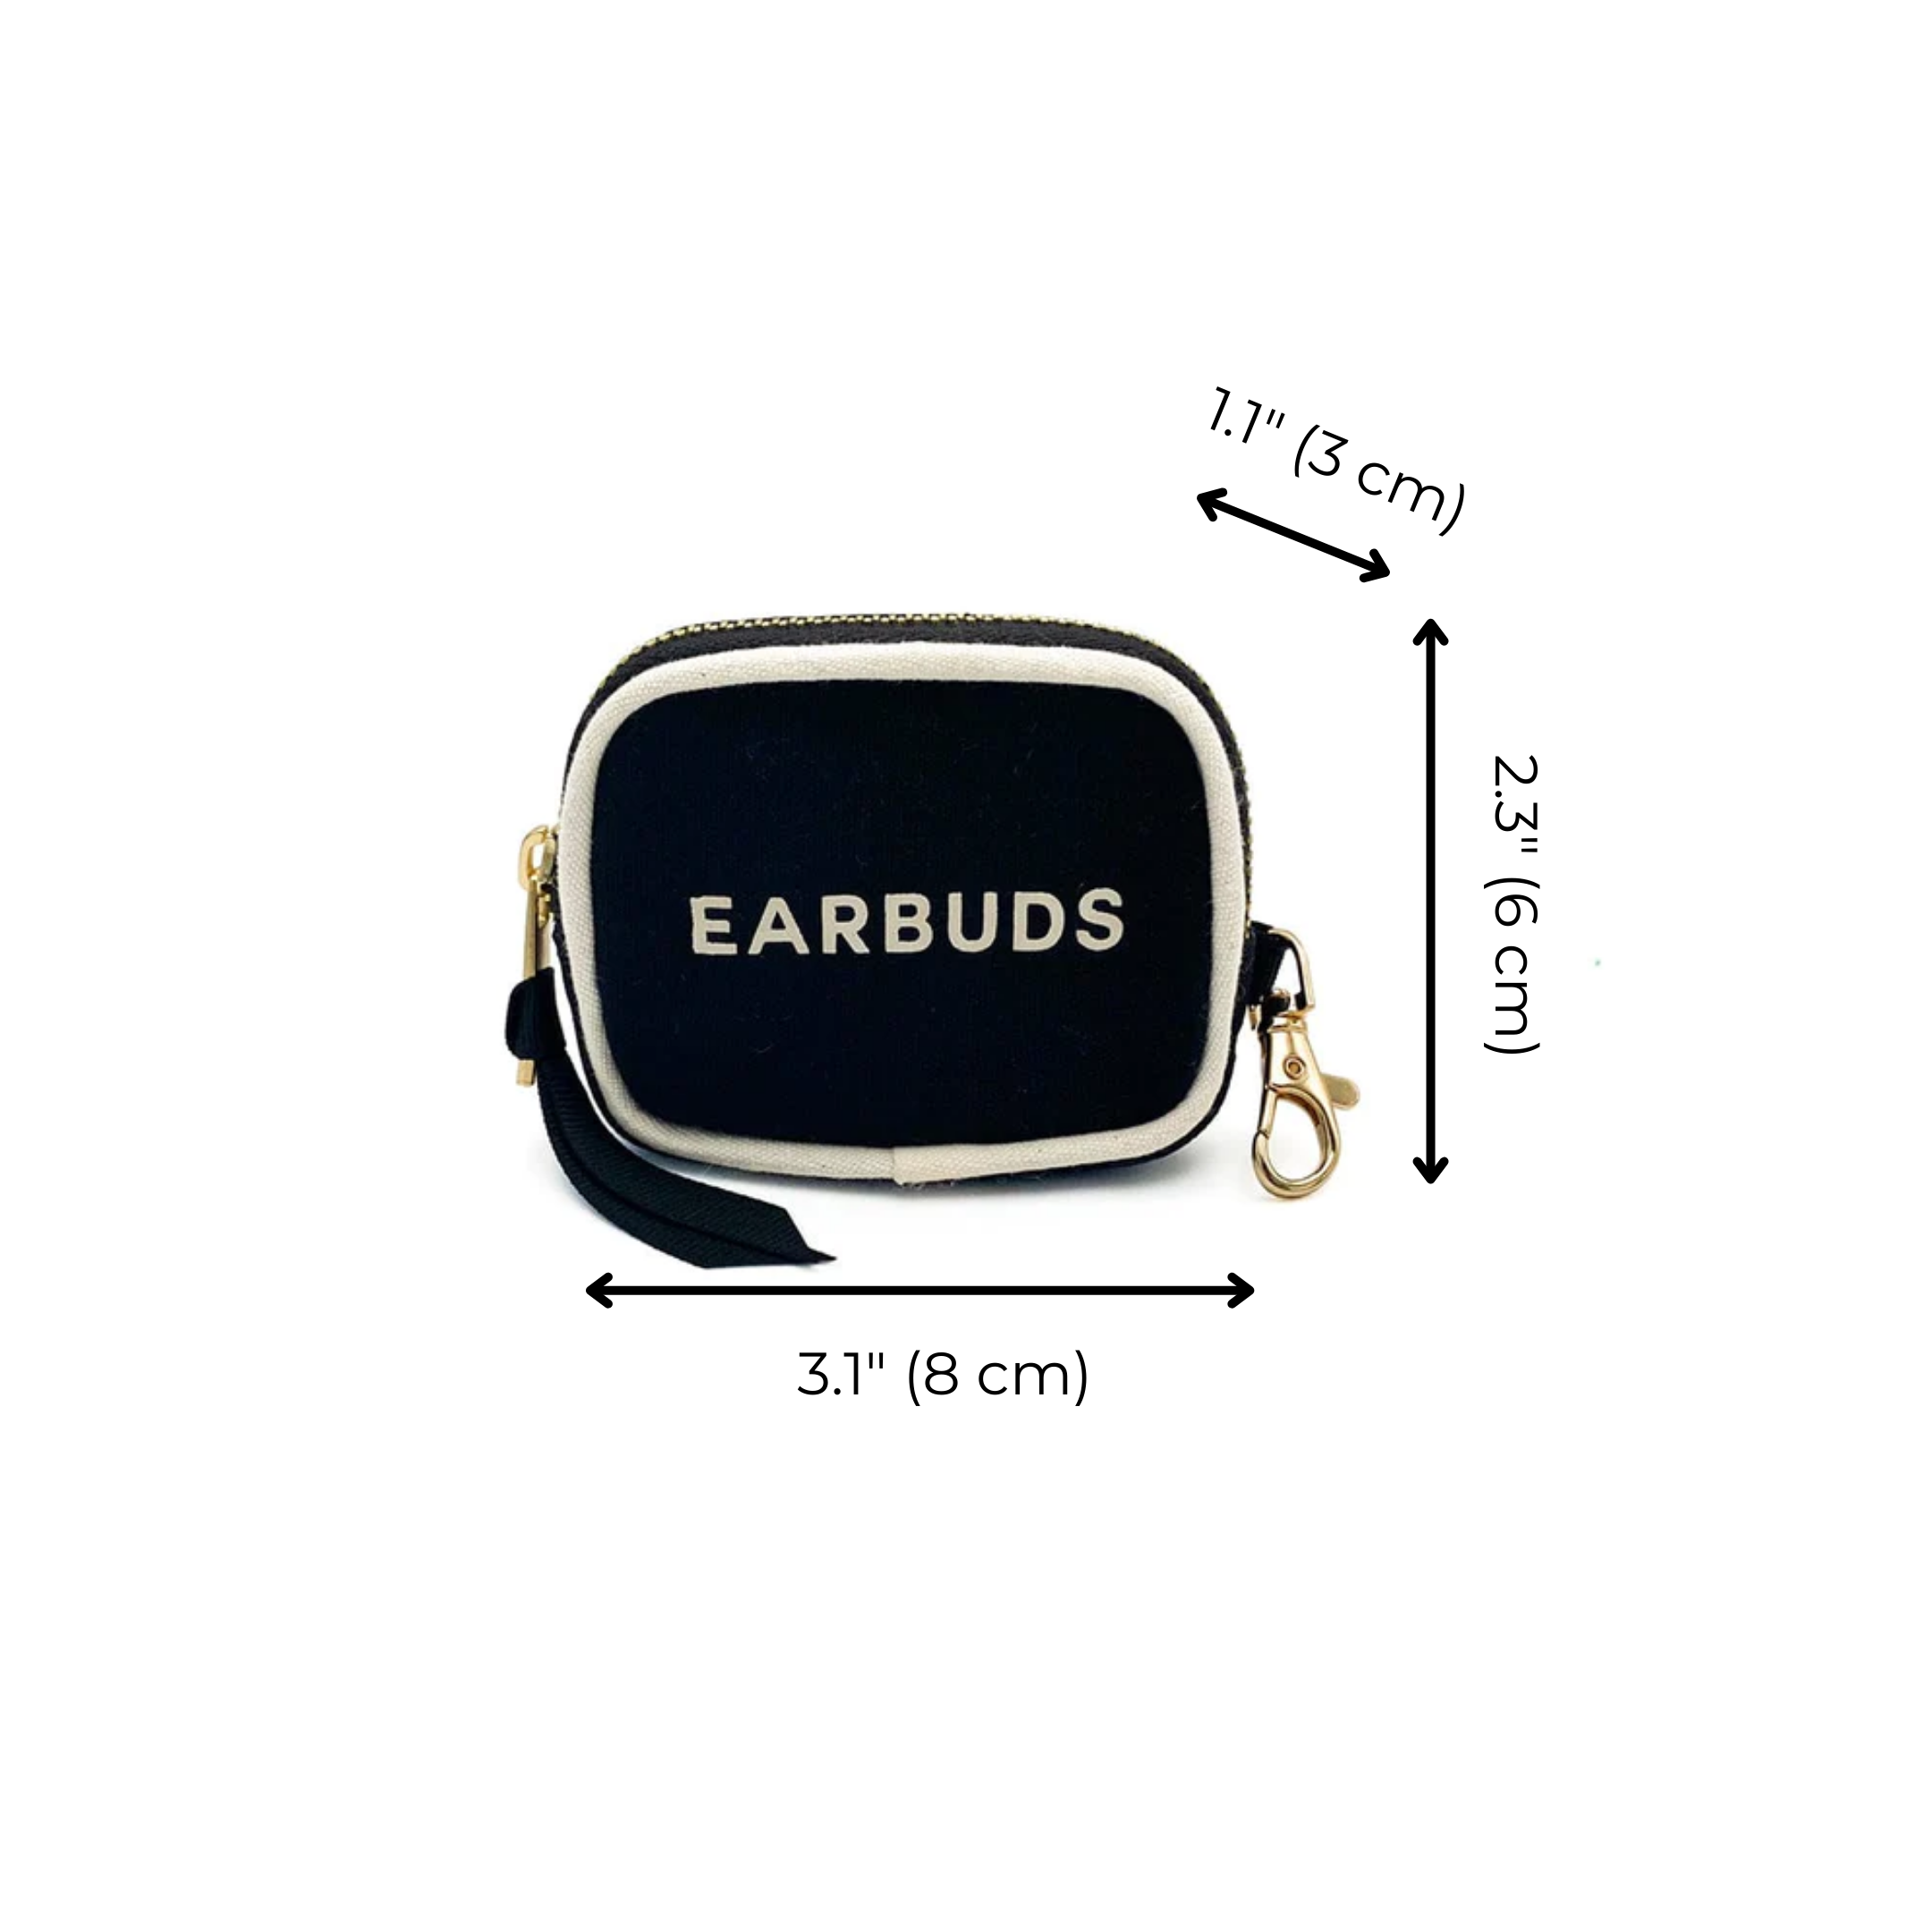 Earbuds/Airpods Case with Clasp, Black | Bag-all